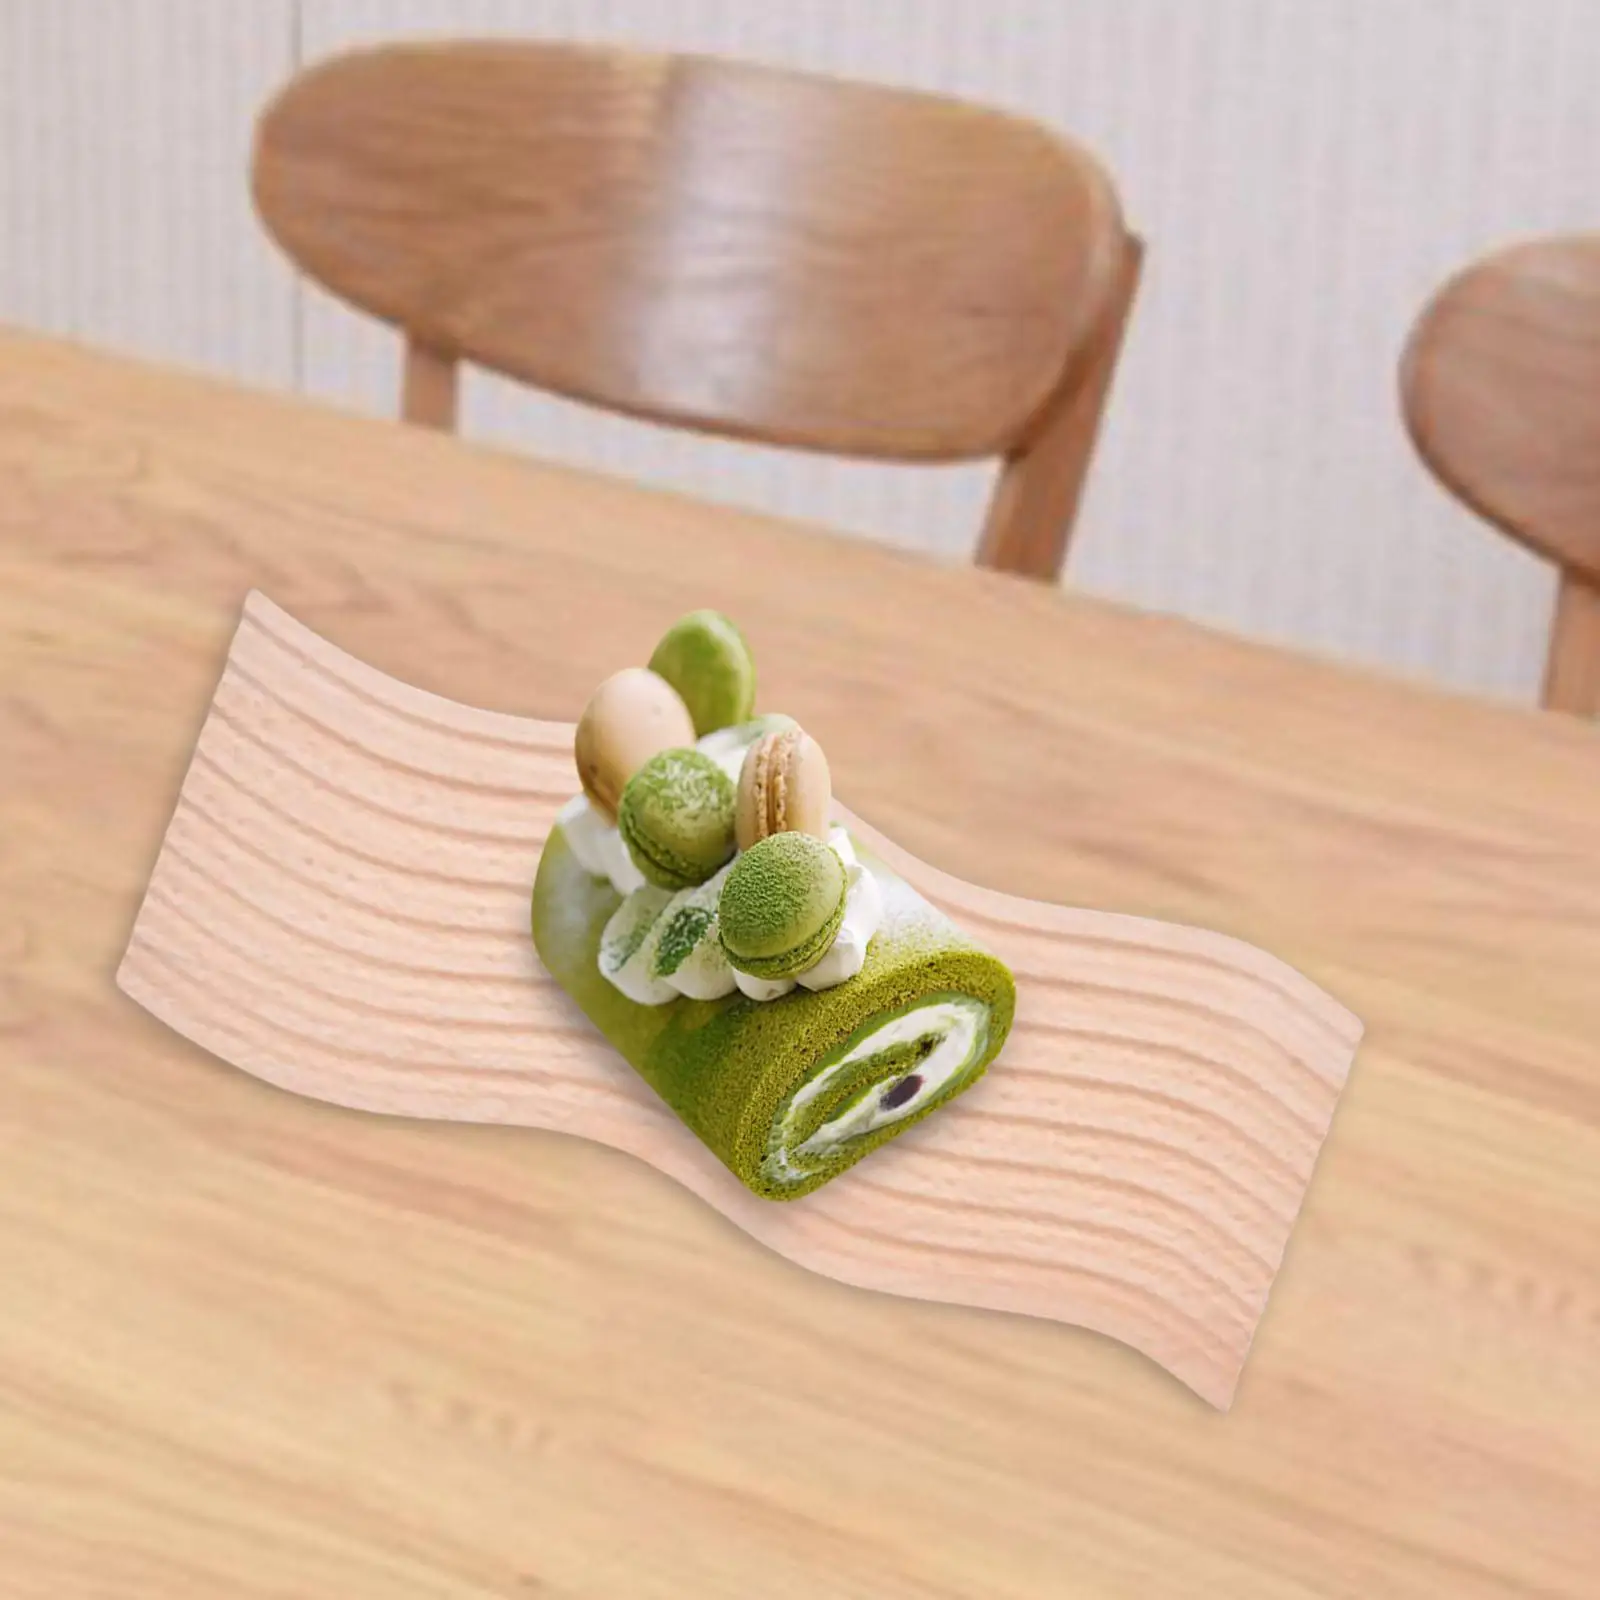 Decorative Wood Cutting Board Fruit Salad Platter Breakfast Board Vegetable Food Dish Serving Tray for Home